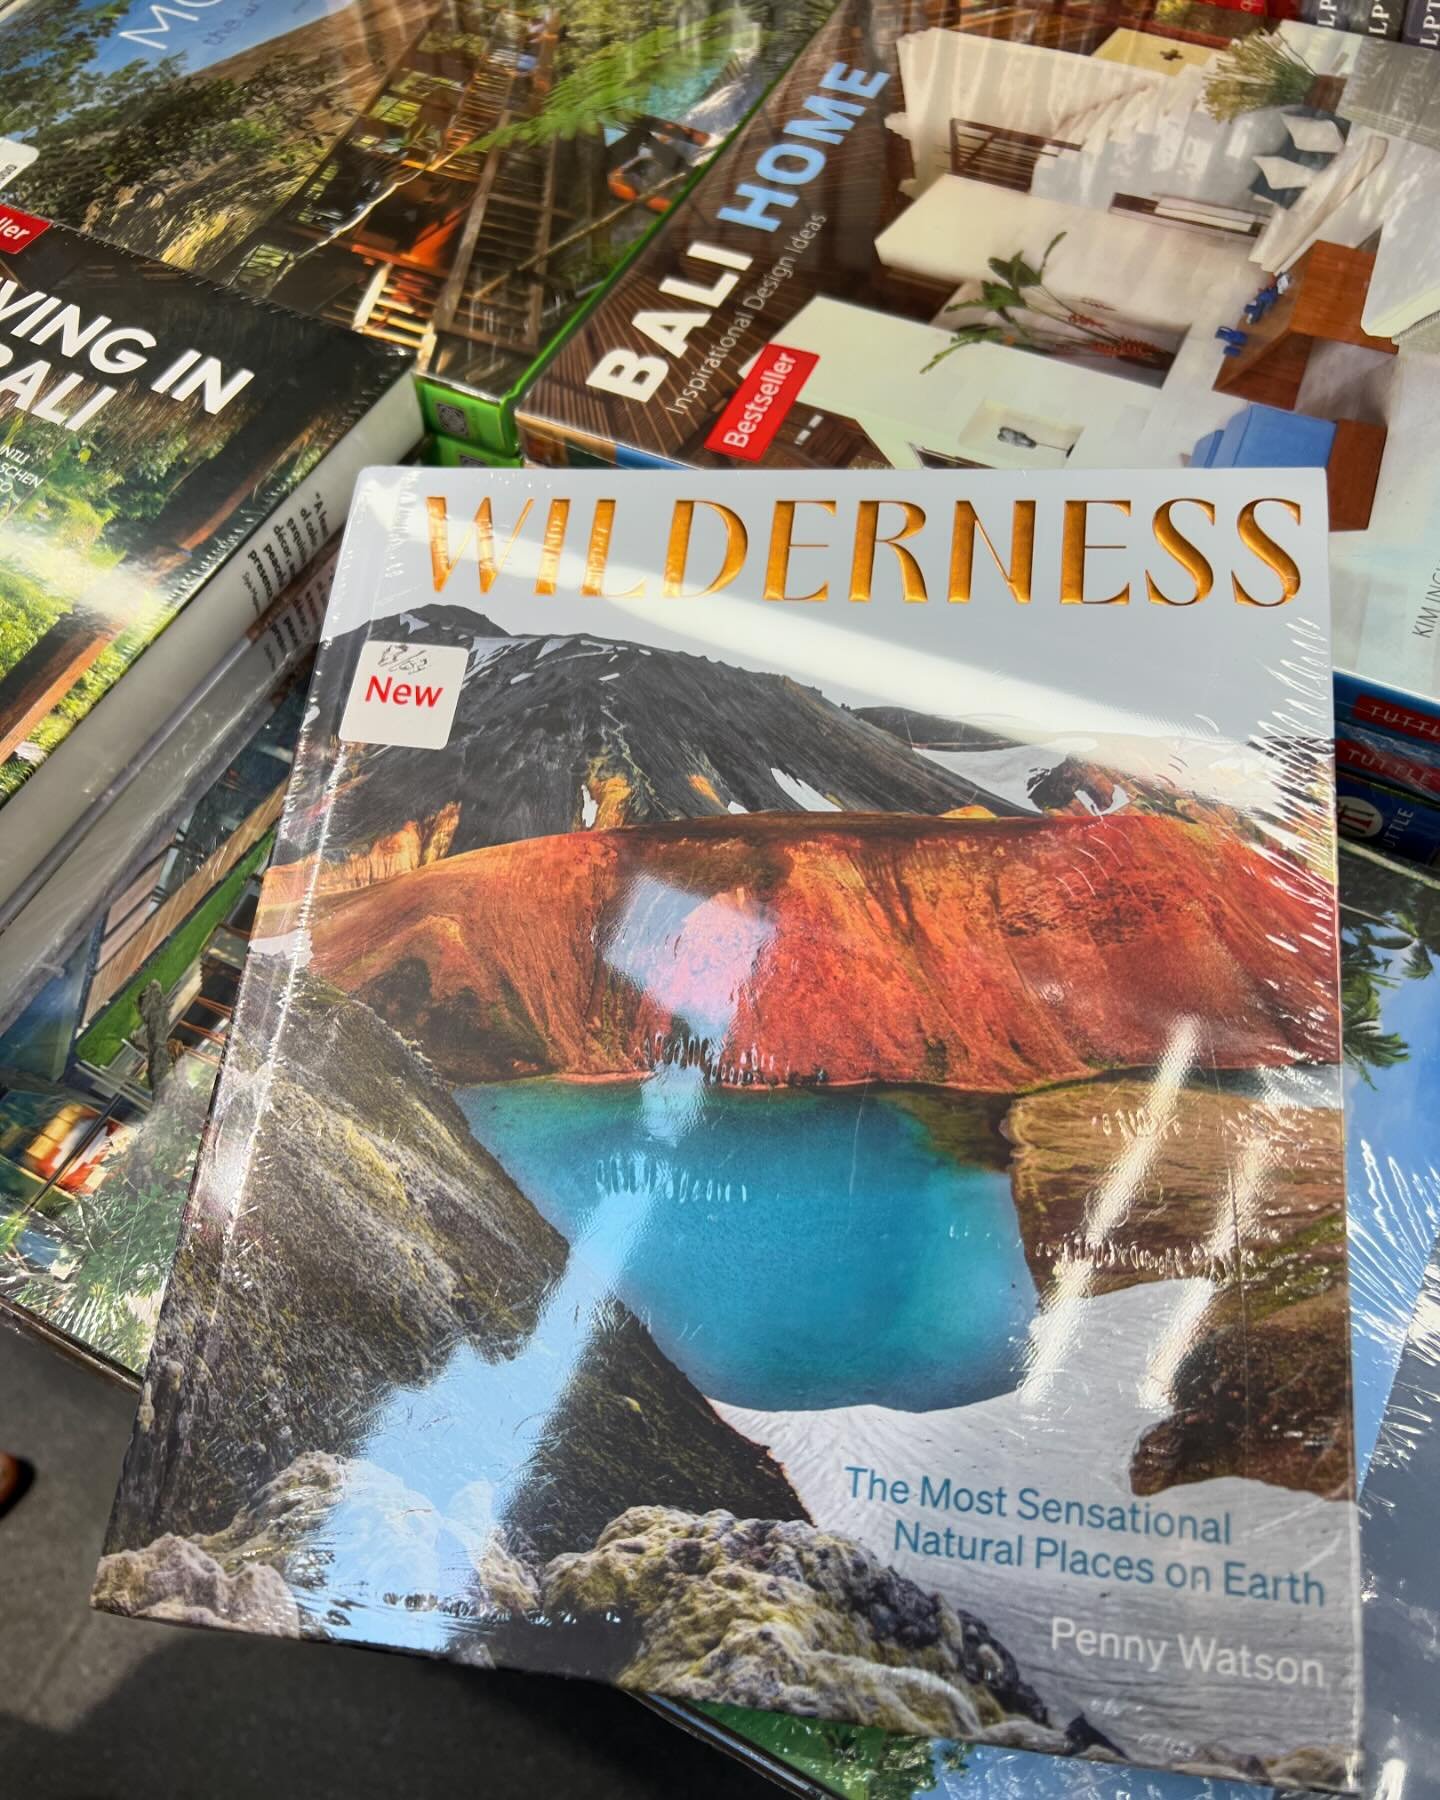 My Wilderness book, spotted in Periplus Bali&rsquo;s new Berawa store. Didn&rsquo;t know it had reached the island. 😁😁😁 👏 👏 👏 

Thanks for stocking @periplus.bali @periplus.canggu.

#travelbooks #wilderness #wildernessbooks #wildernessadventure